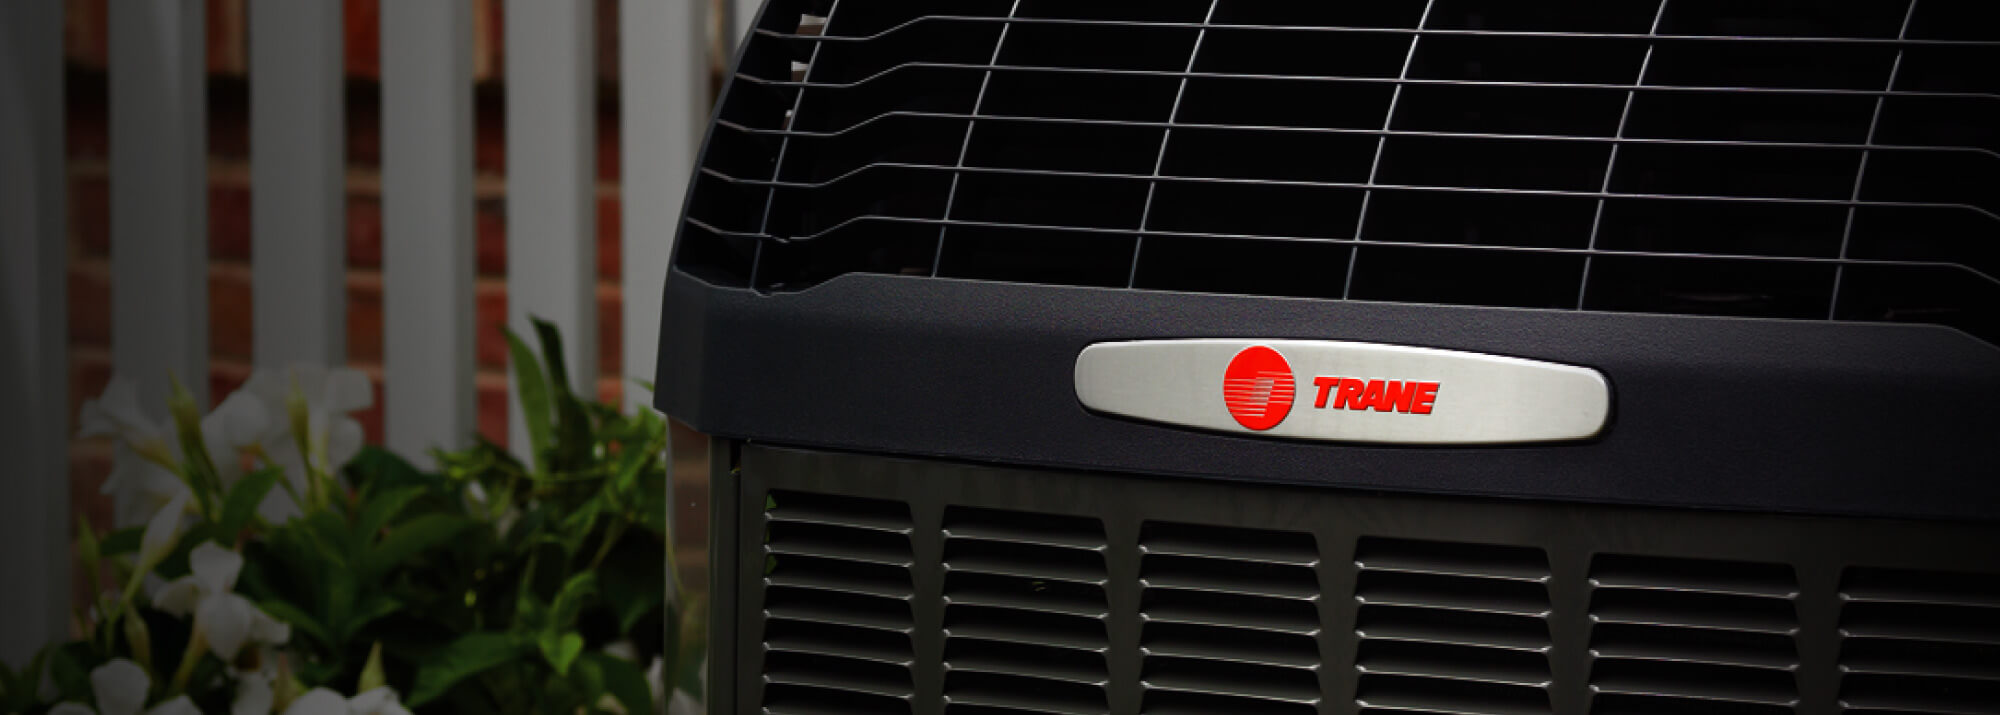 Front of a New Trane Brand Air Conditioner